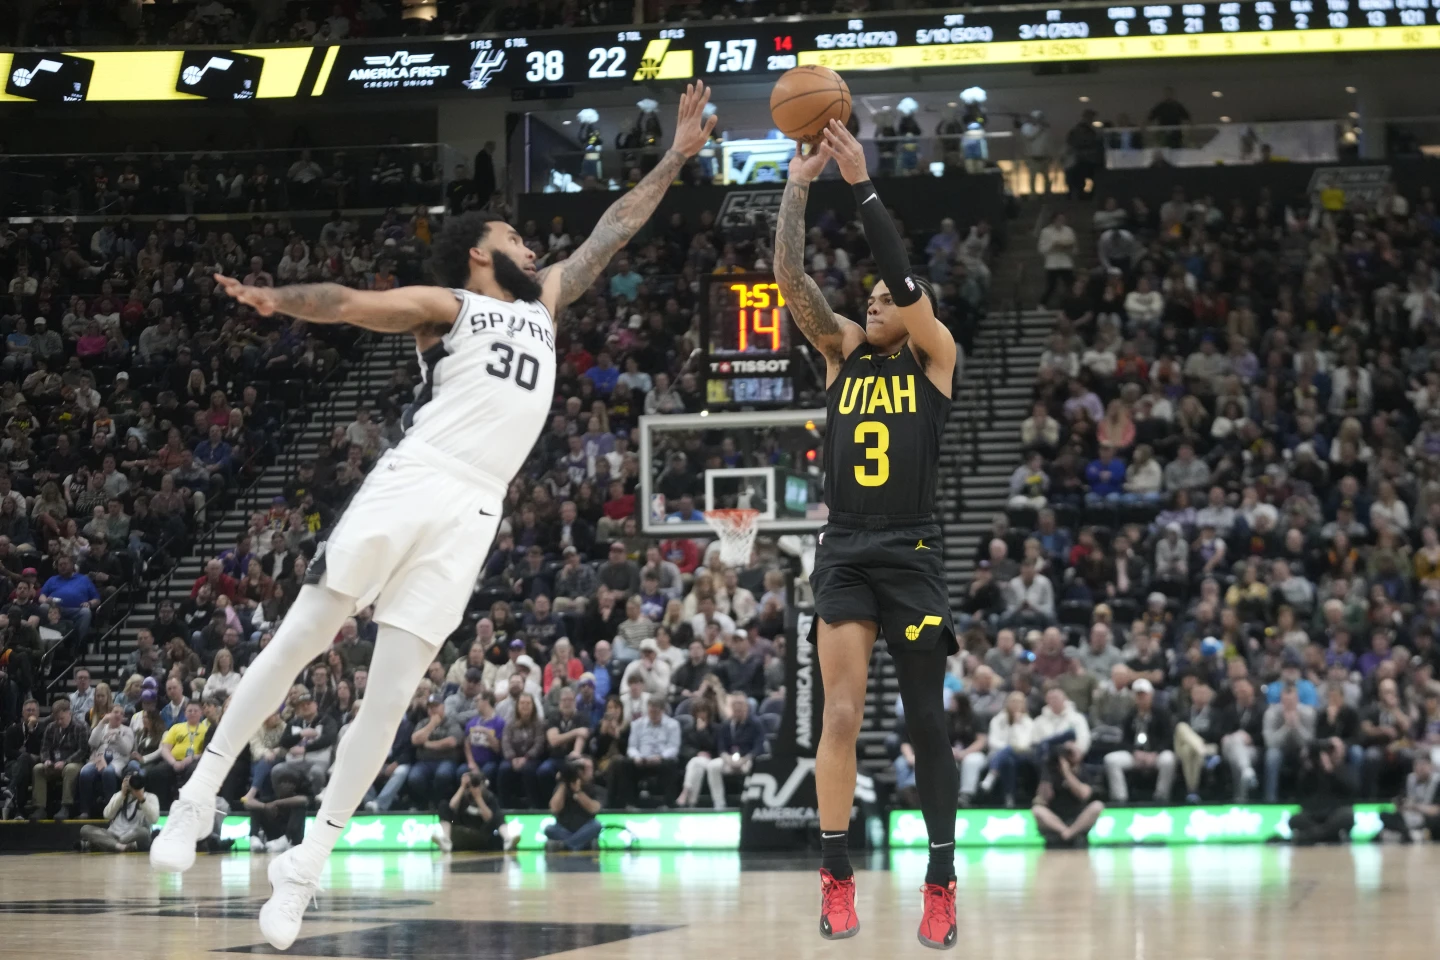 In a game against the Utah Jazz, Vassell racks up 31 points, while Victor Wembanyama contributes 19 points and blocks 5 shots to guide the Antonio Spurs to a 118-111 victory